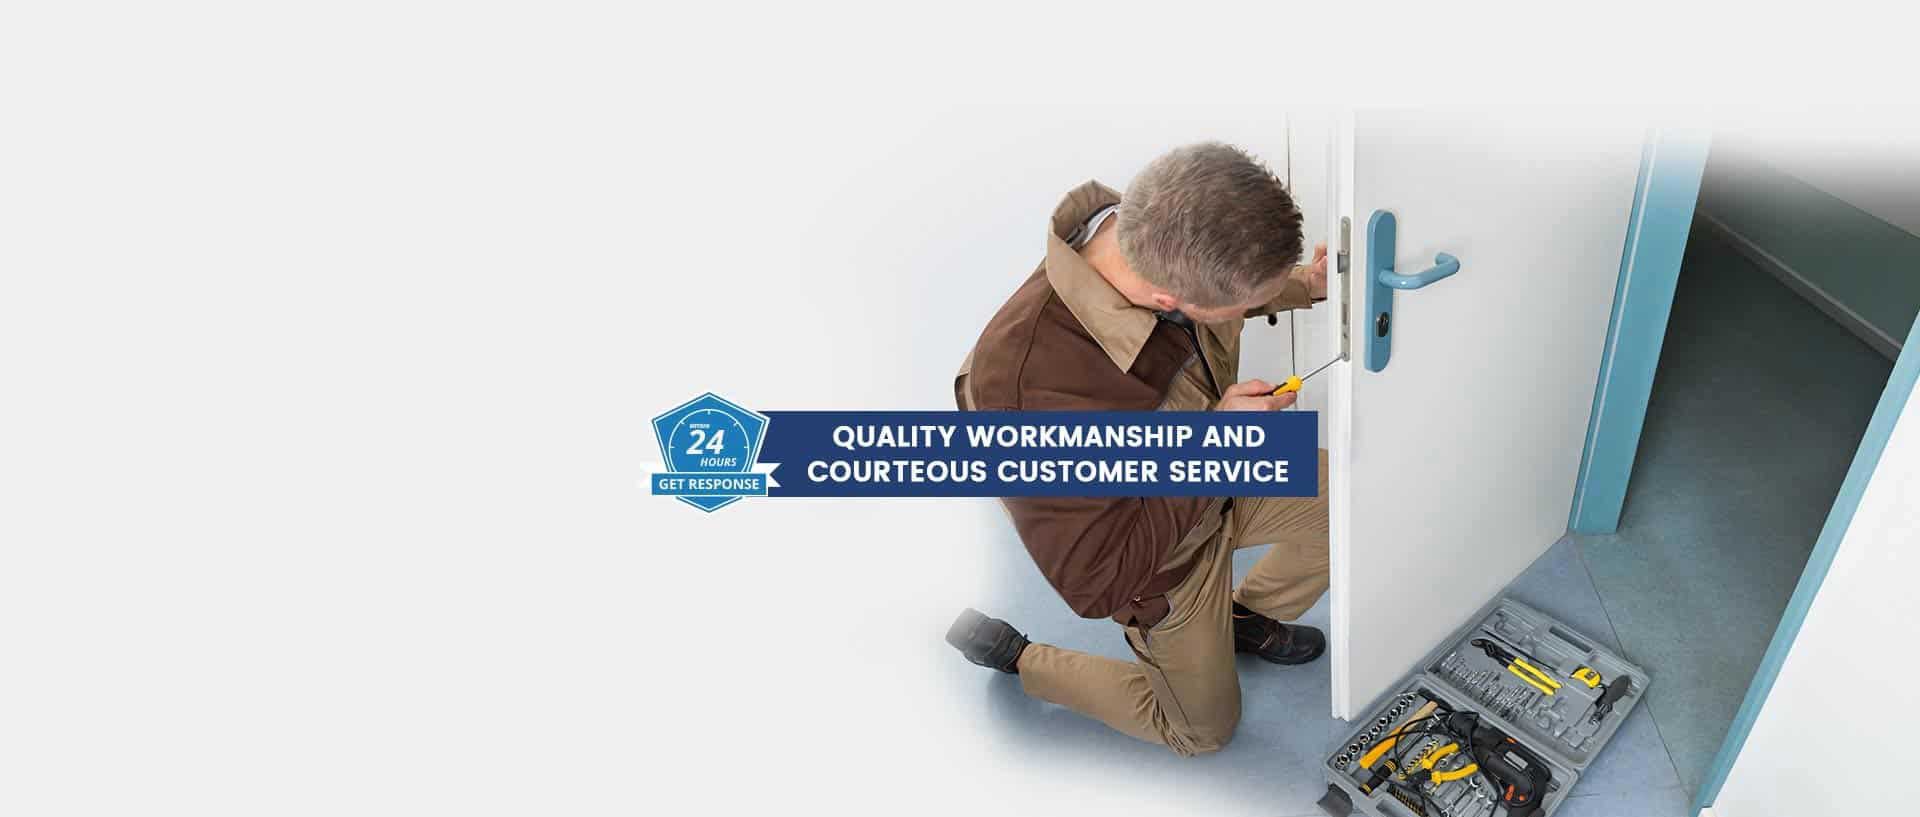 - Quality Workmanship and Courteous Customer Service